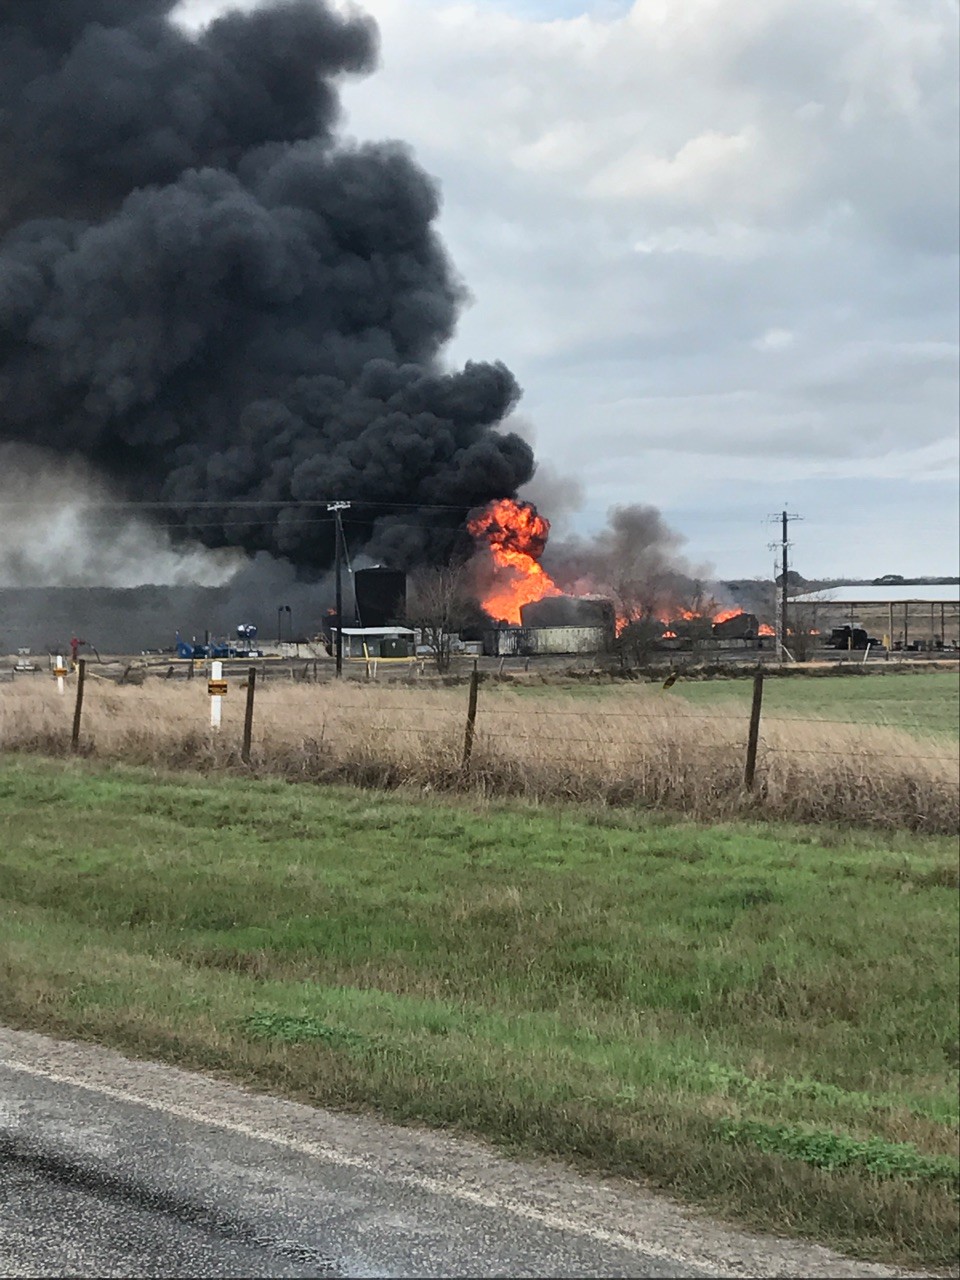 Fire blazes and smoke billows after a lightning strike caused an explosion at an oil storage facility at FM 1116 and CR 206 in southern Gonzales County at 7:30 a.m., on Sunday, Feb. 25. No one was injured in the explosion.